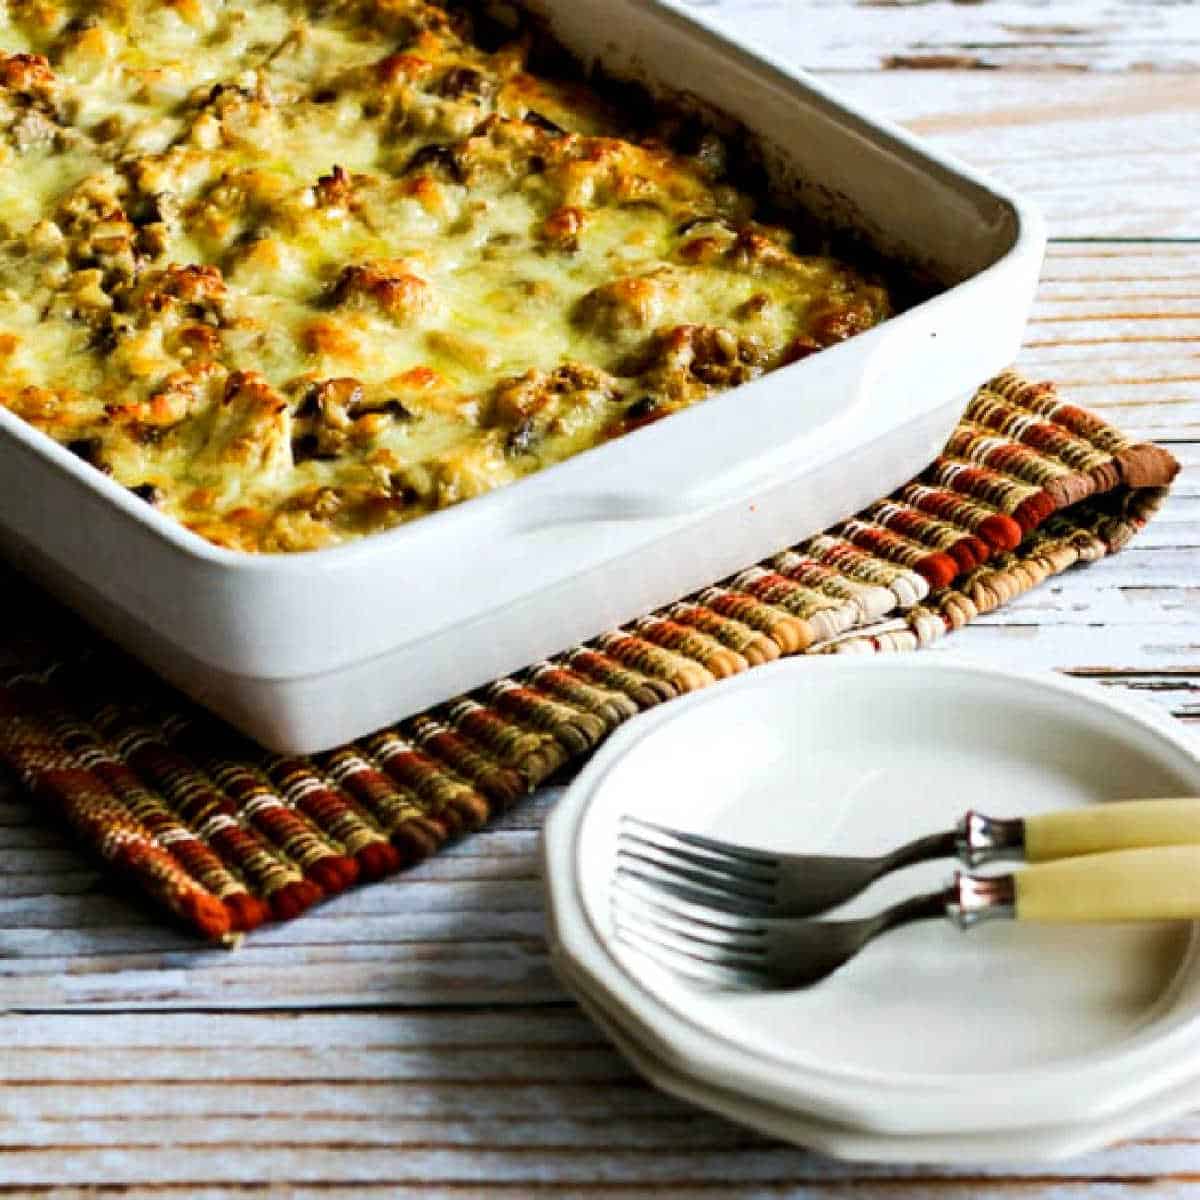 Low-Carb Turkey Casserole in baking dish with plates, forks